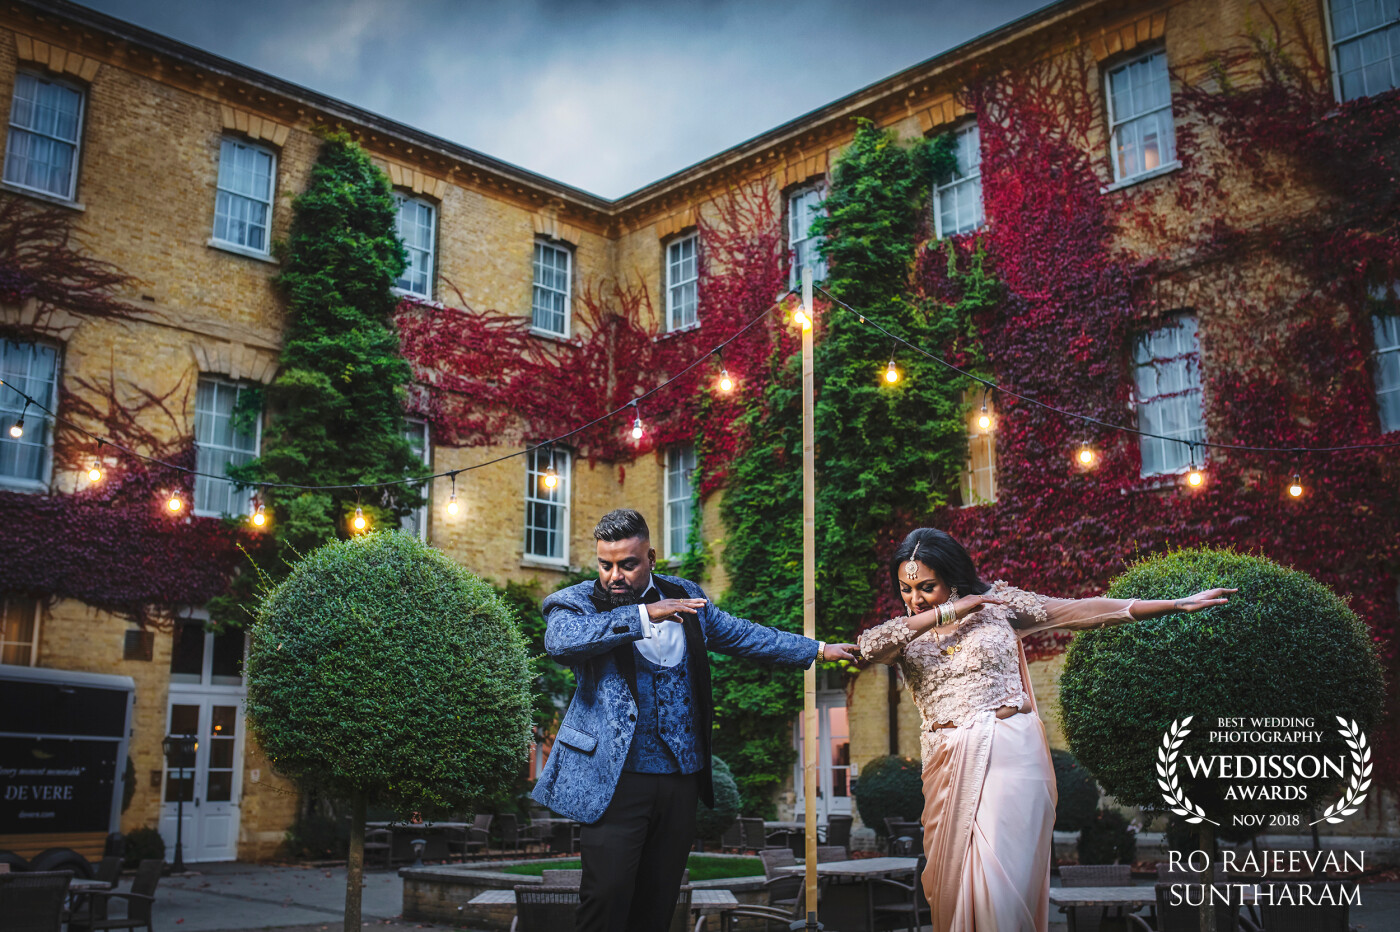 “Whilst wrapping up Juni and Emma's couple shoot at the hotel they were getting ready, I started their epic royal themed reception night off with the couple's favorite signature pose. The bride loves the Dab and somehow convinced the groom to do it along with her“.